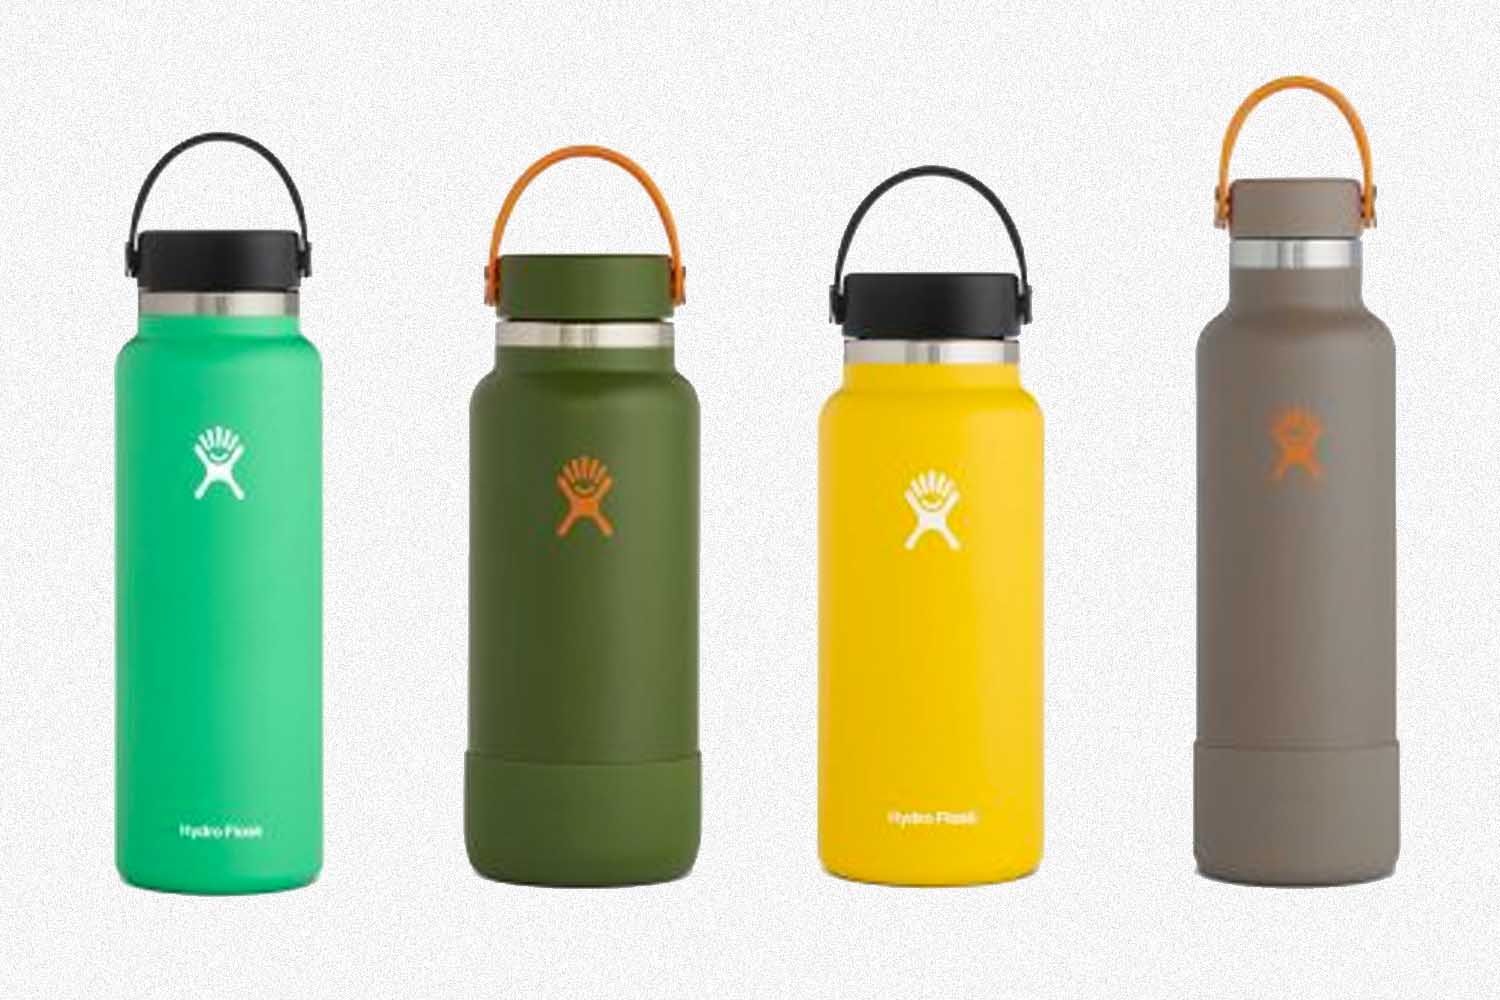 Hydro Flask's Product Roundup From the Outdoor Retailer Snow Show